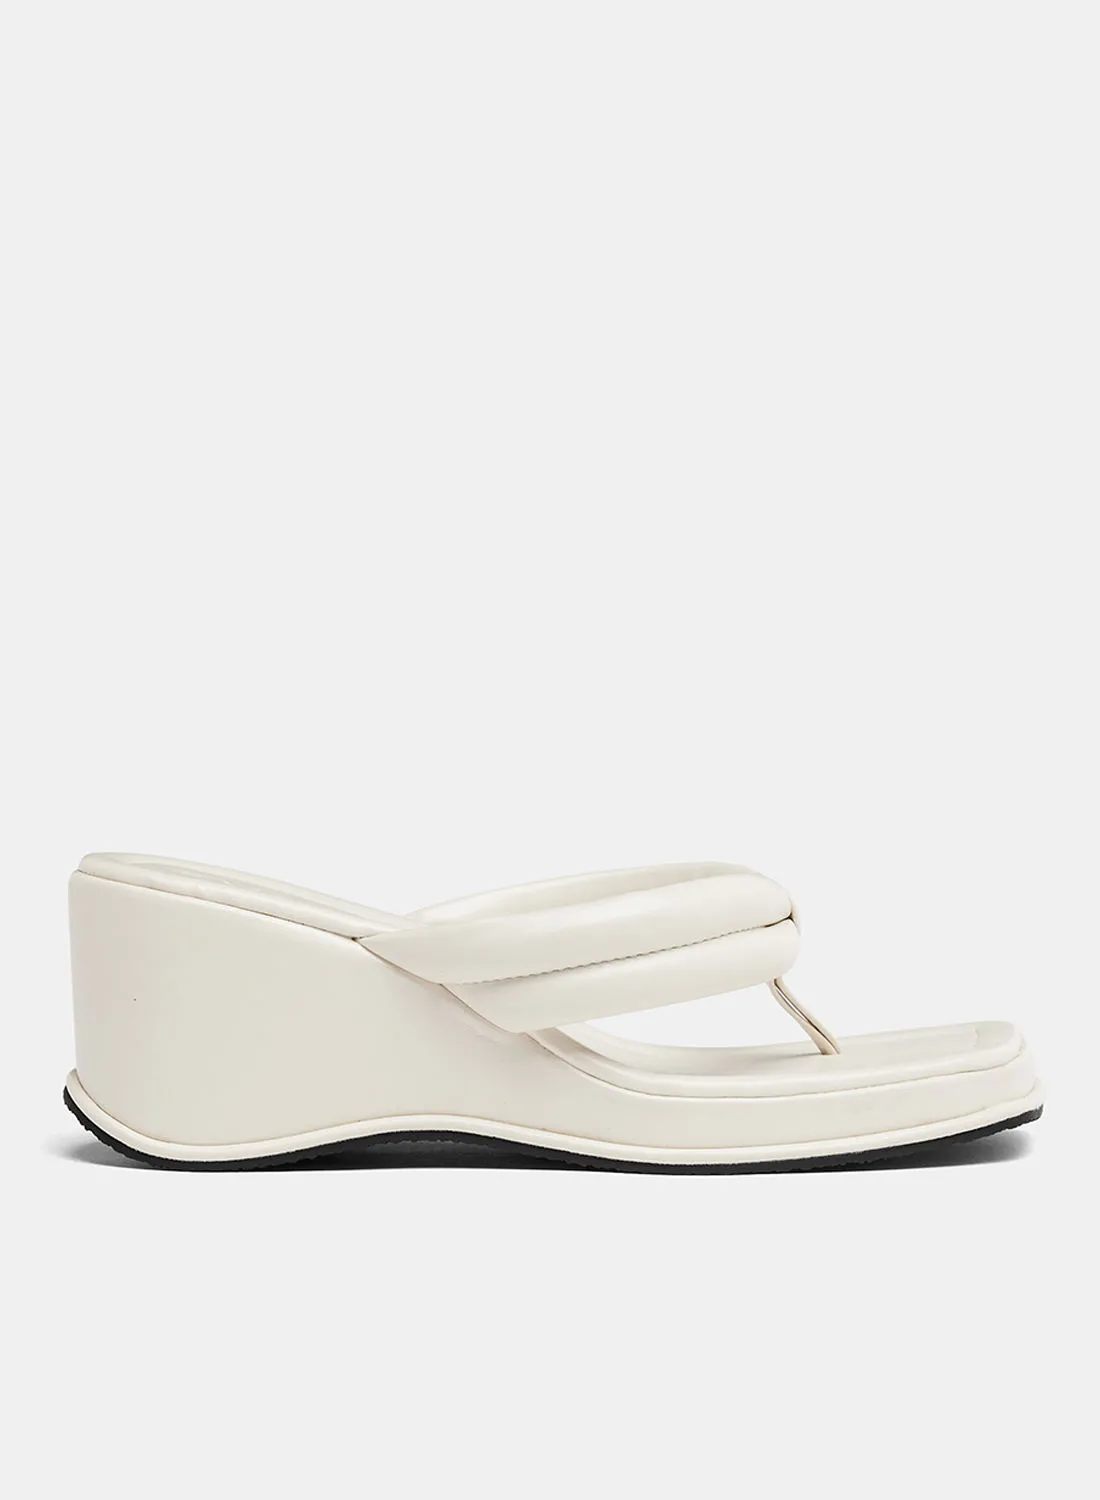 LABEL RAIL Quilted Wedge Heel Sandals White